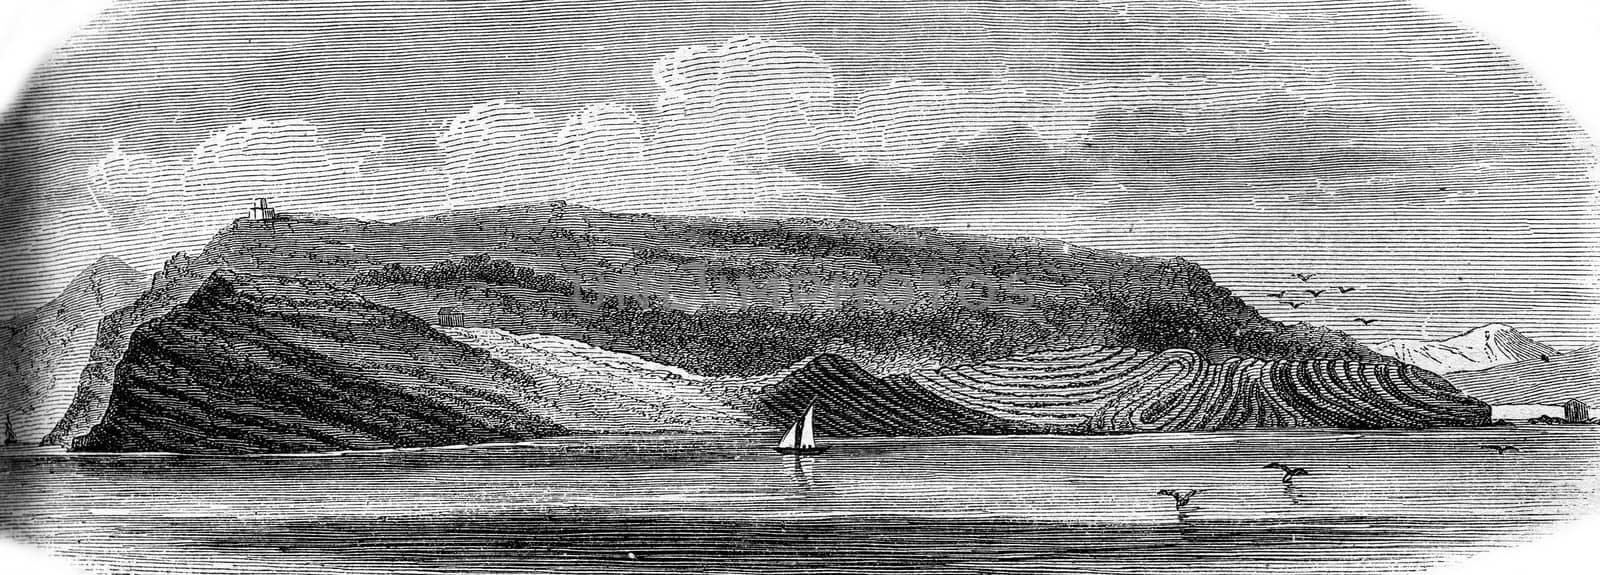 The Palmaria island in the Gulf of Spezia, south side, vintage engraved illustration. Magasin Pittoresque 1869.
